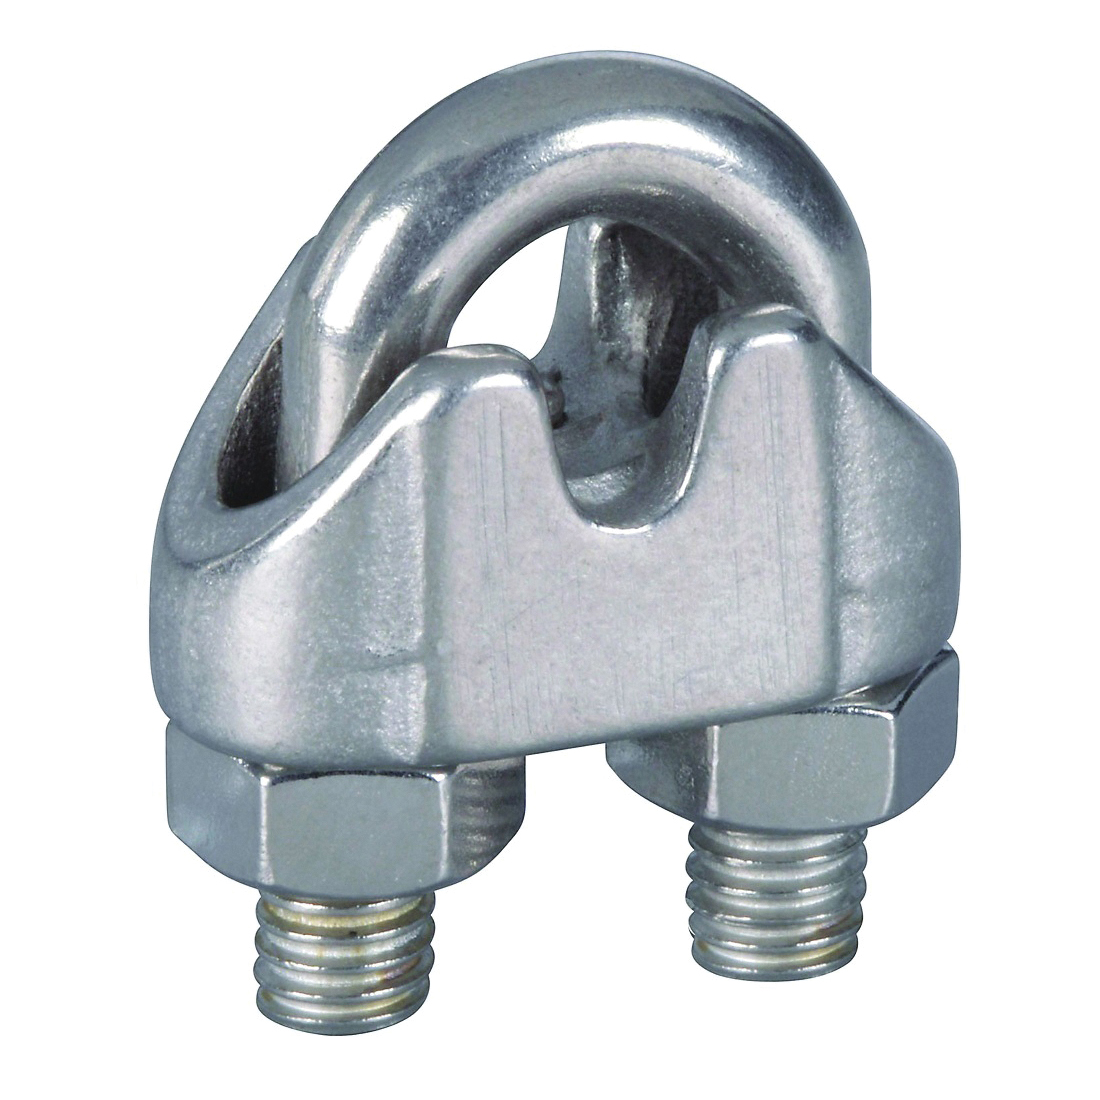 4230BC Series N830-313 Wire Cable Clamp, 3/16 in Dia Cable, 1 in L, Malleable Iron